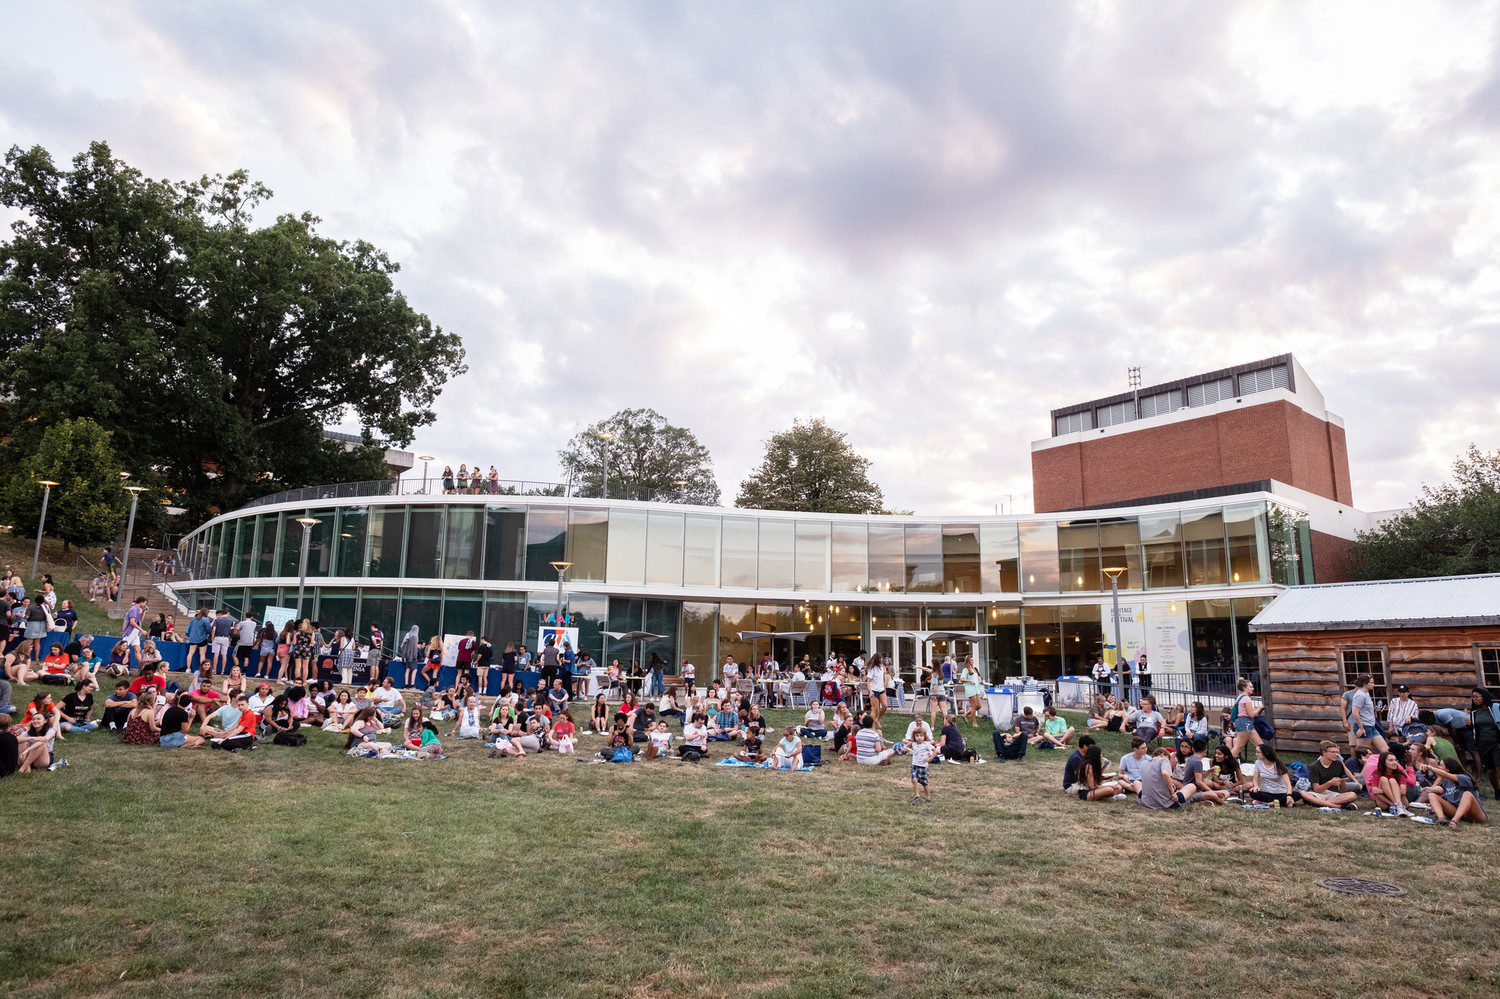 UVA-Arts-welcomes-back-over-1200-students-faculty-and-staff-at-their-annual-UVA-Arts-Grounds-Day-September-2019.-By-Coe-Sweet.jpg